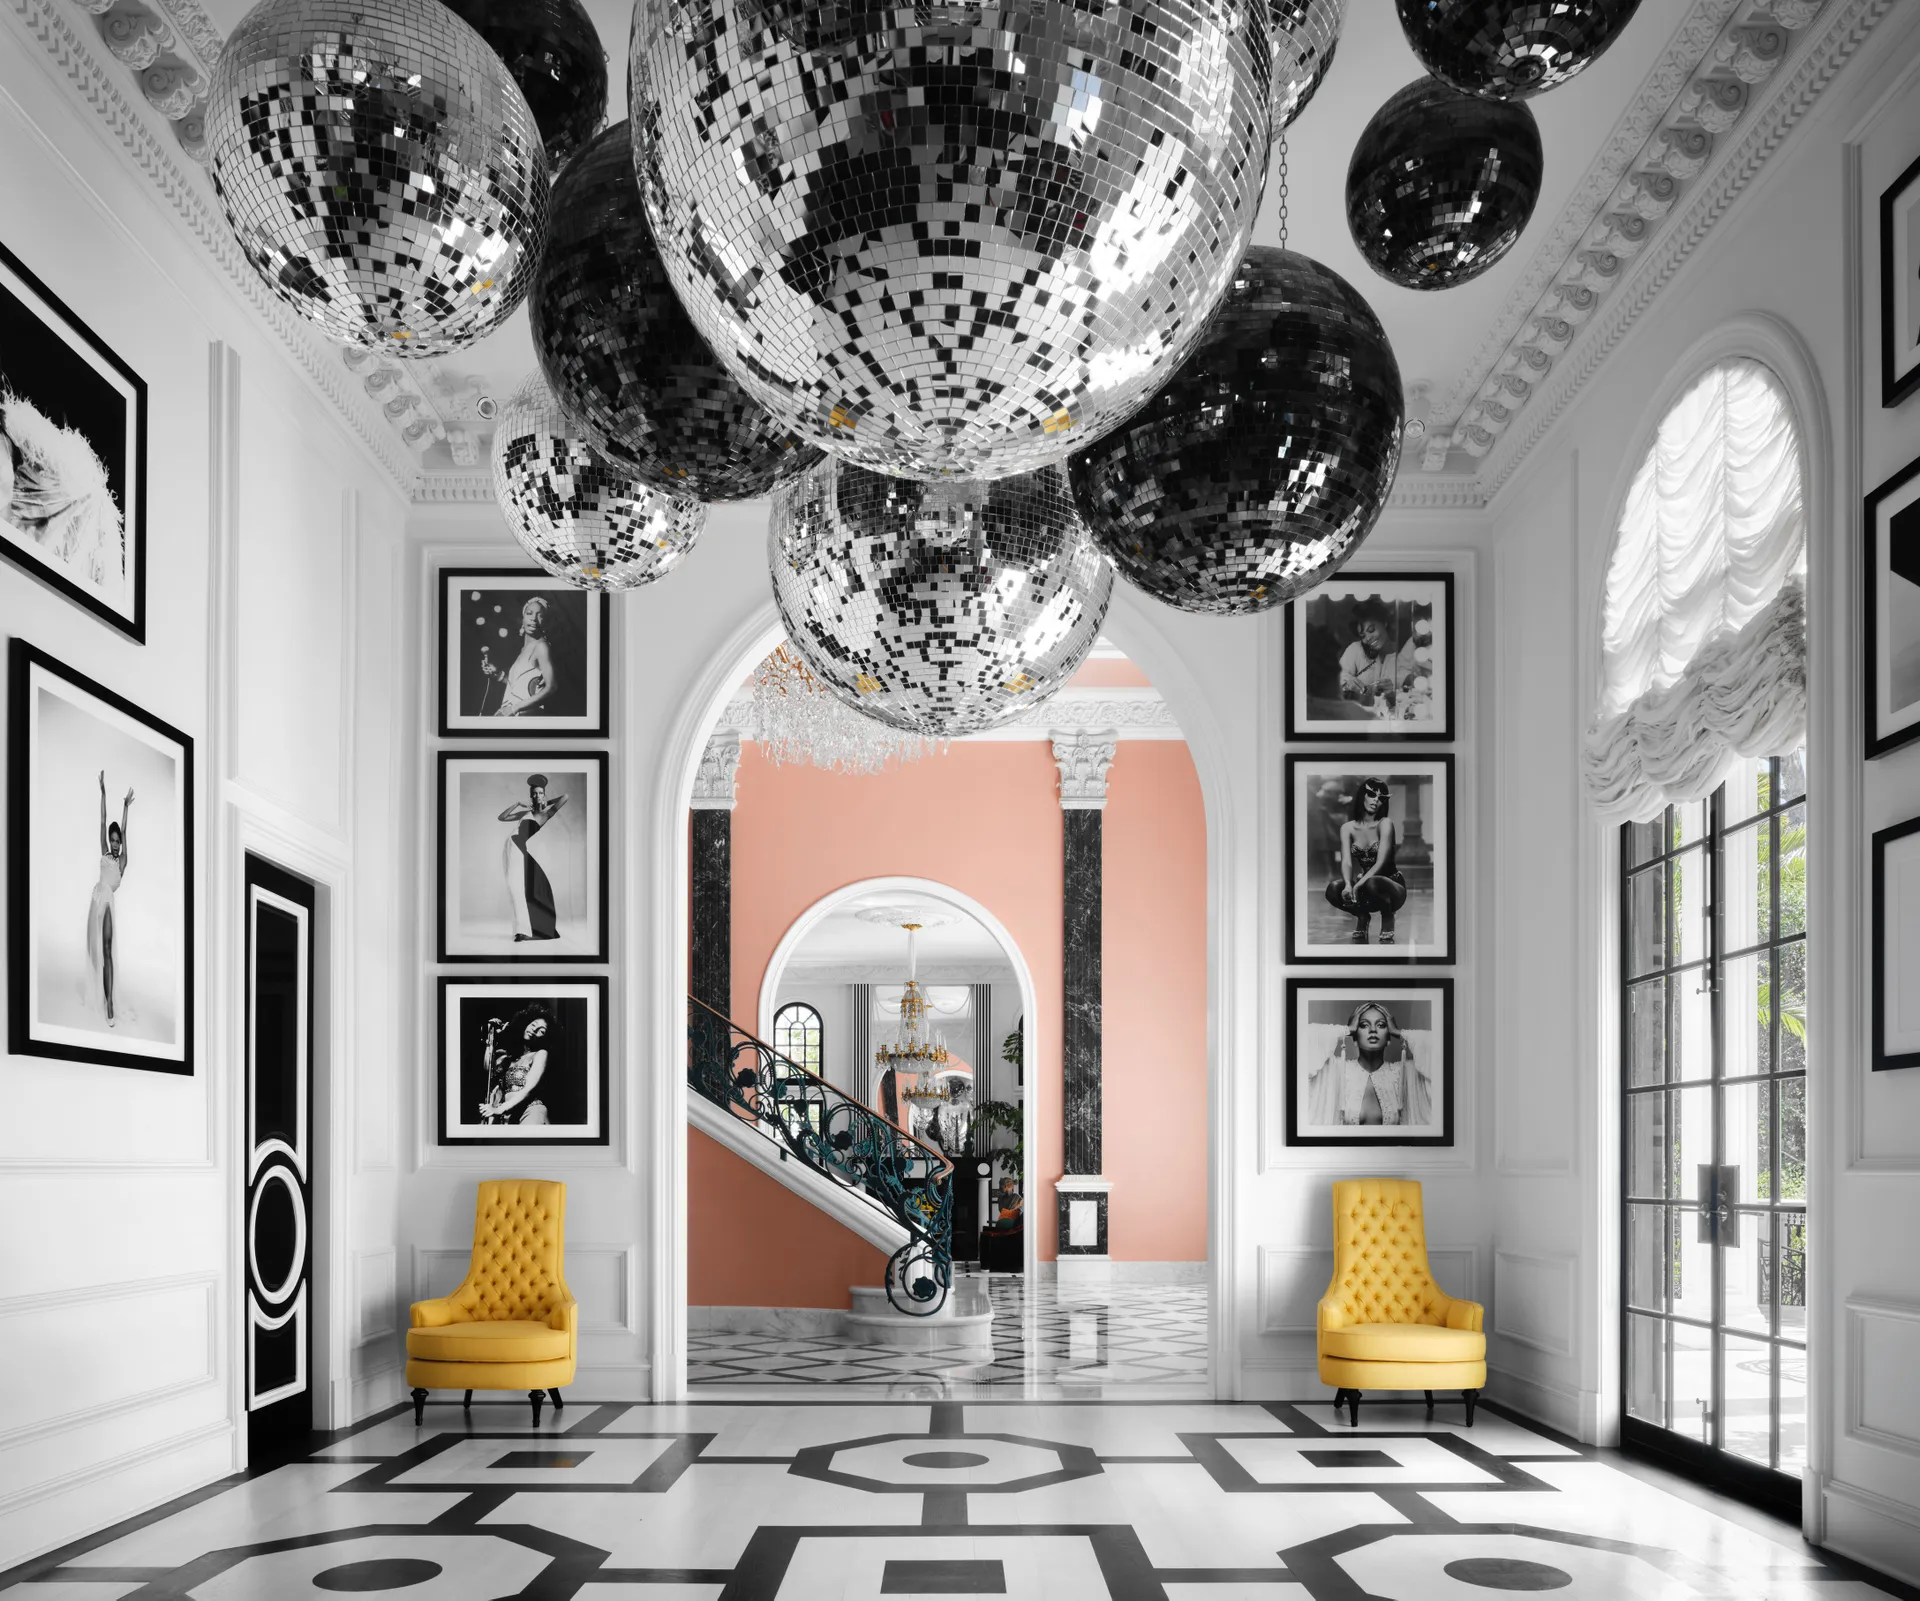 RuPauls black and white room designed by Martyn Lawrence Bullard